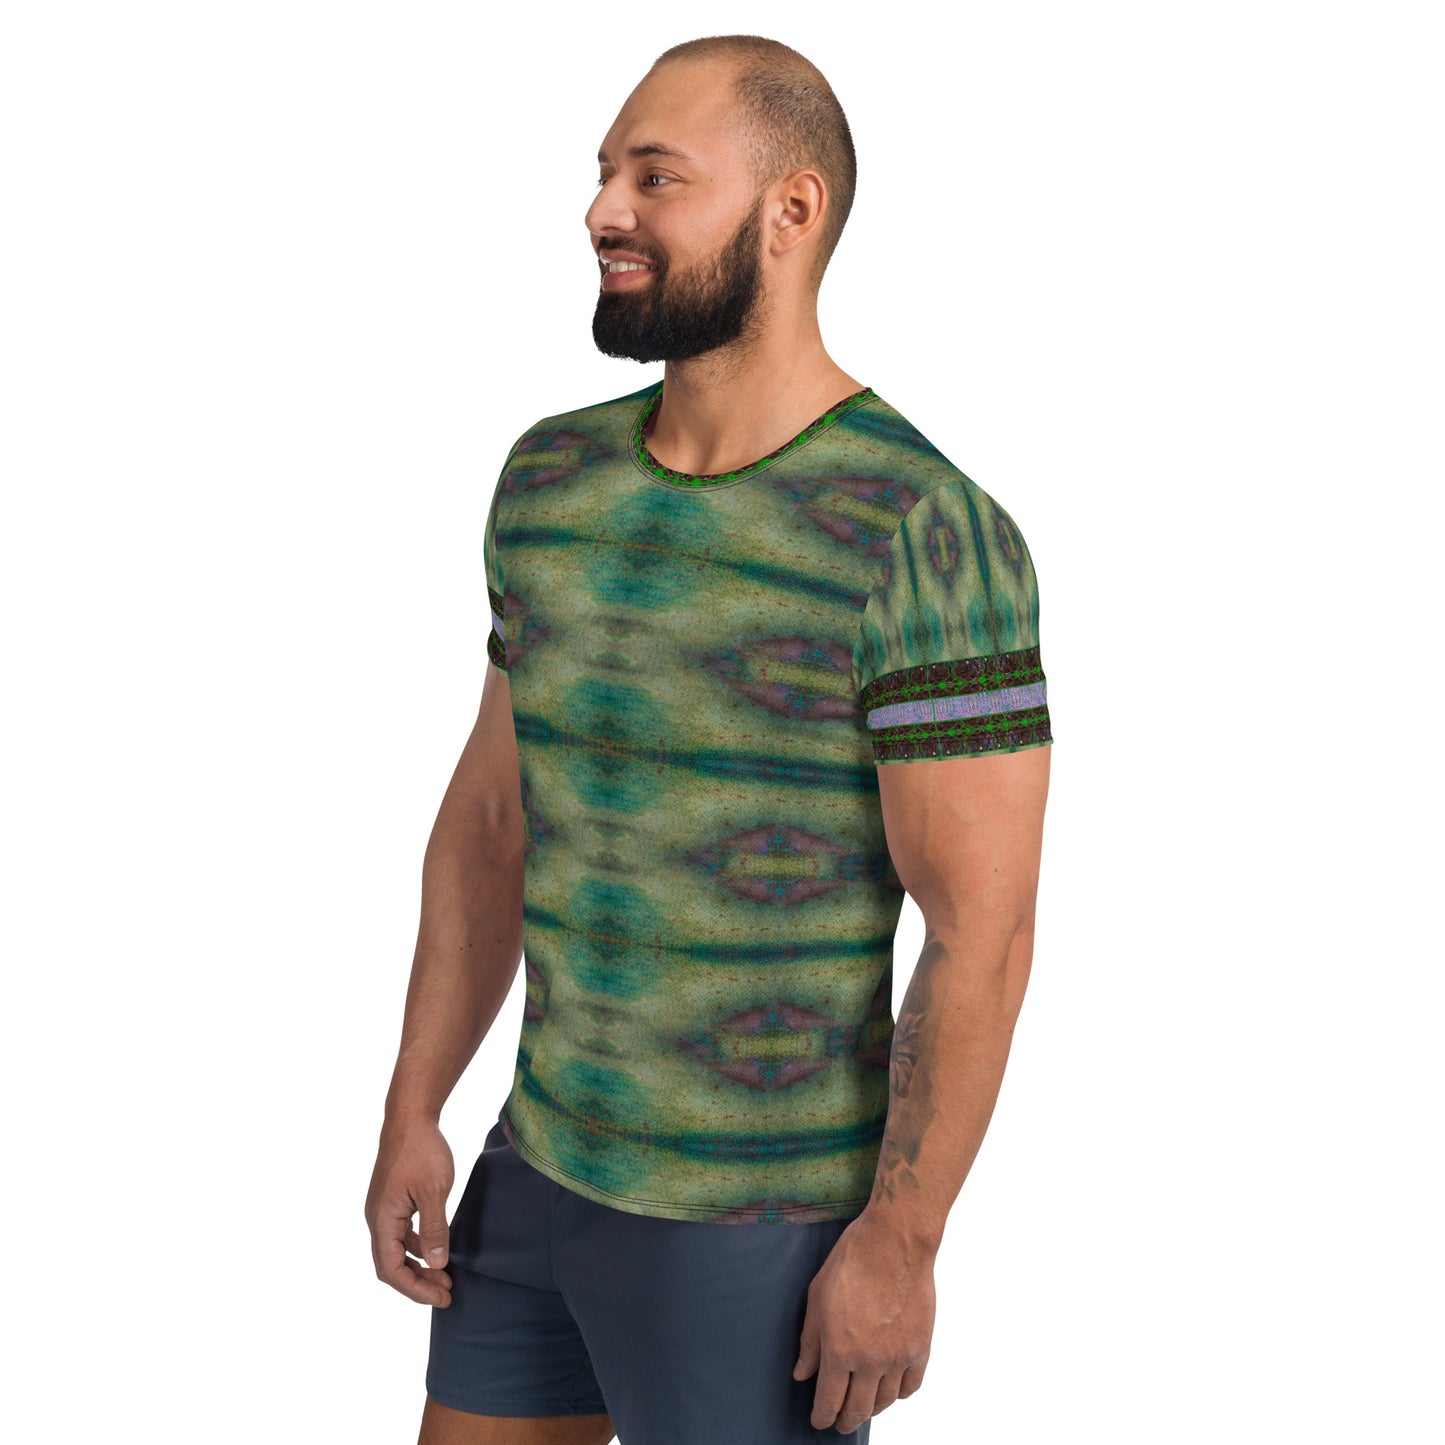 Athletic T-shirt (His/They)(Tree Link Stripe) RJSTH@Fabric#4 RJSTHS2021 RJS